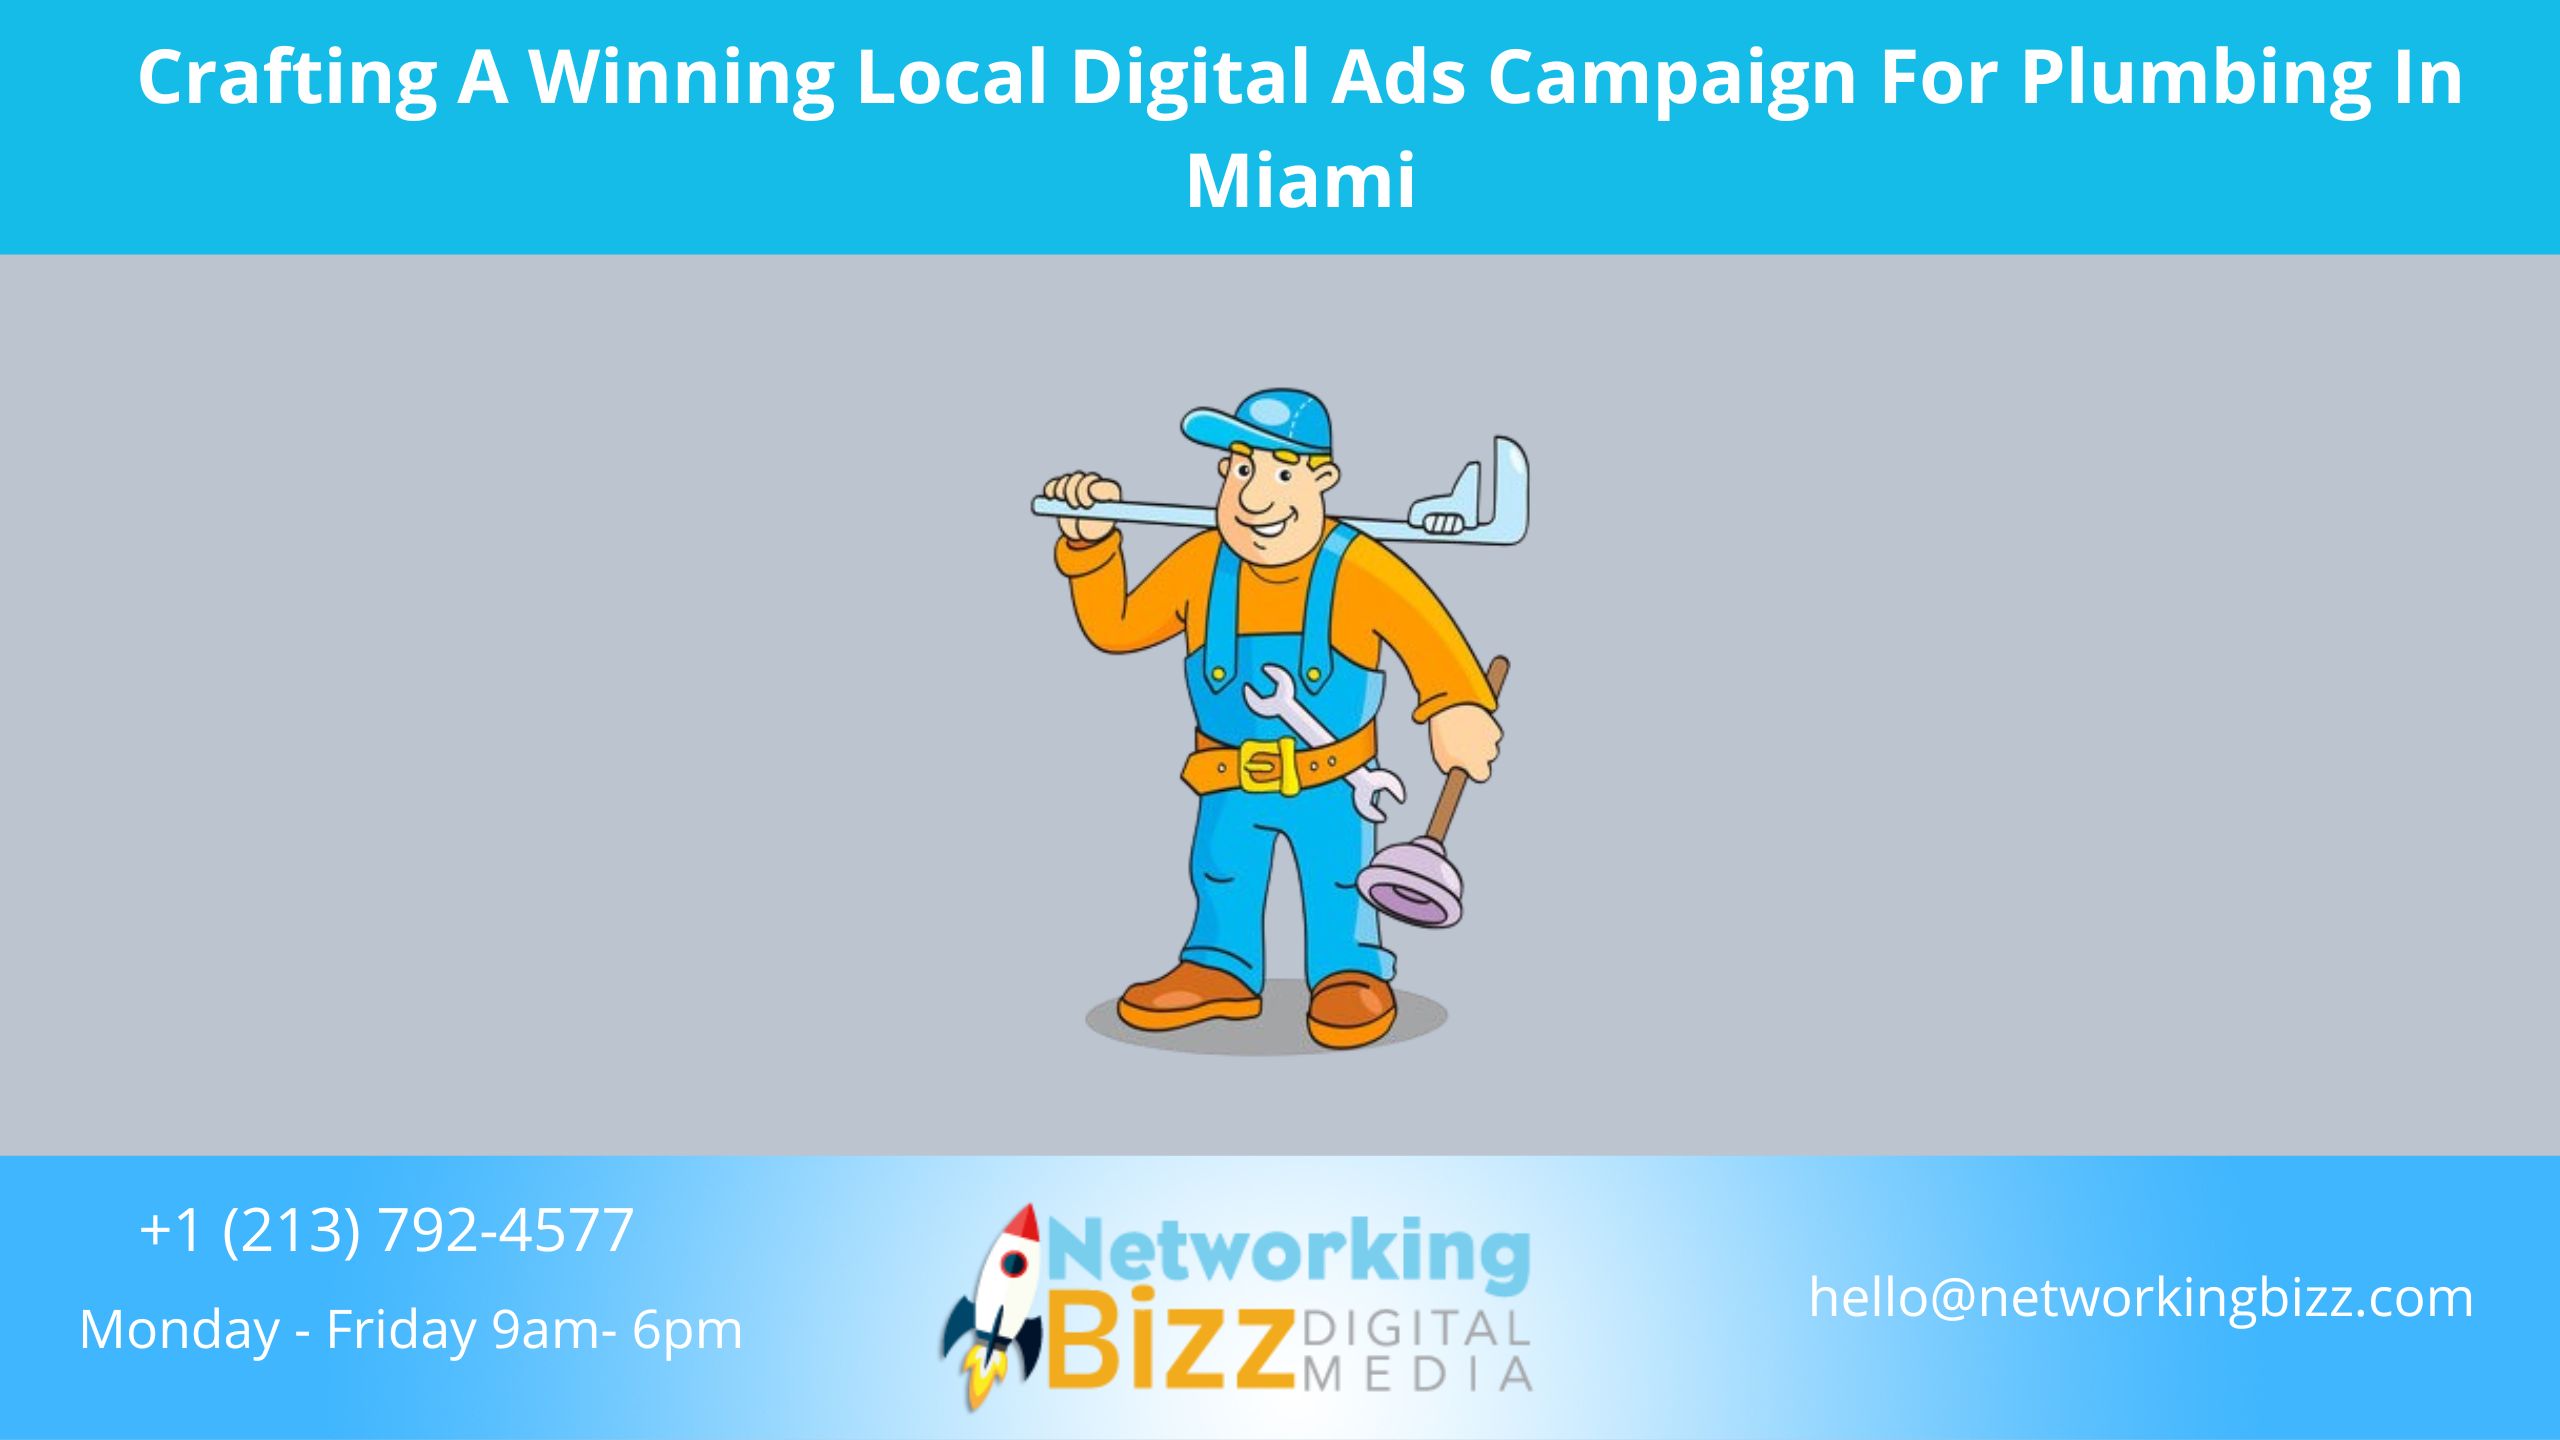 Crafting A Winning Local Digital Ads Campaign For Plumbing In Miami